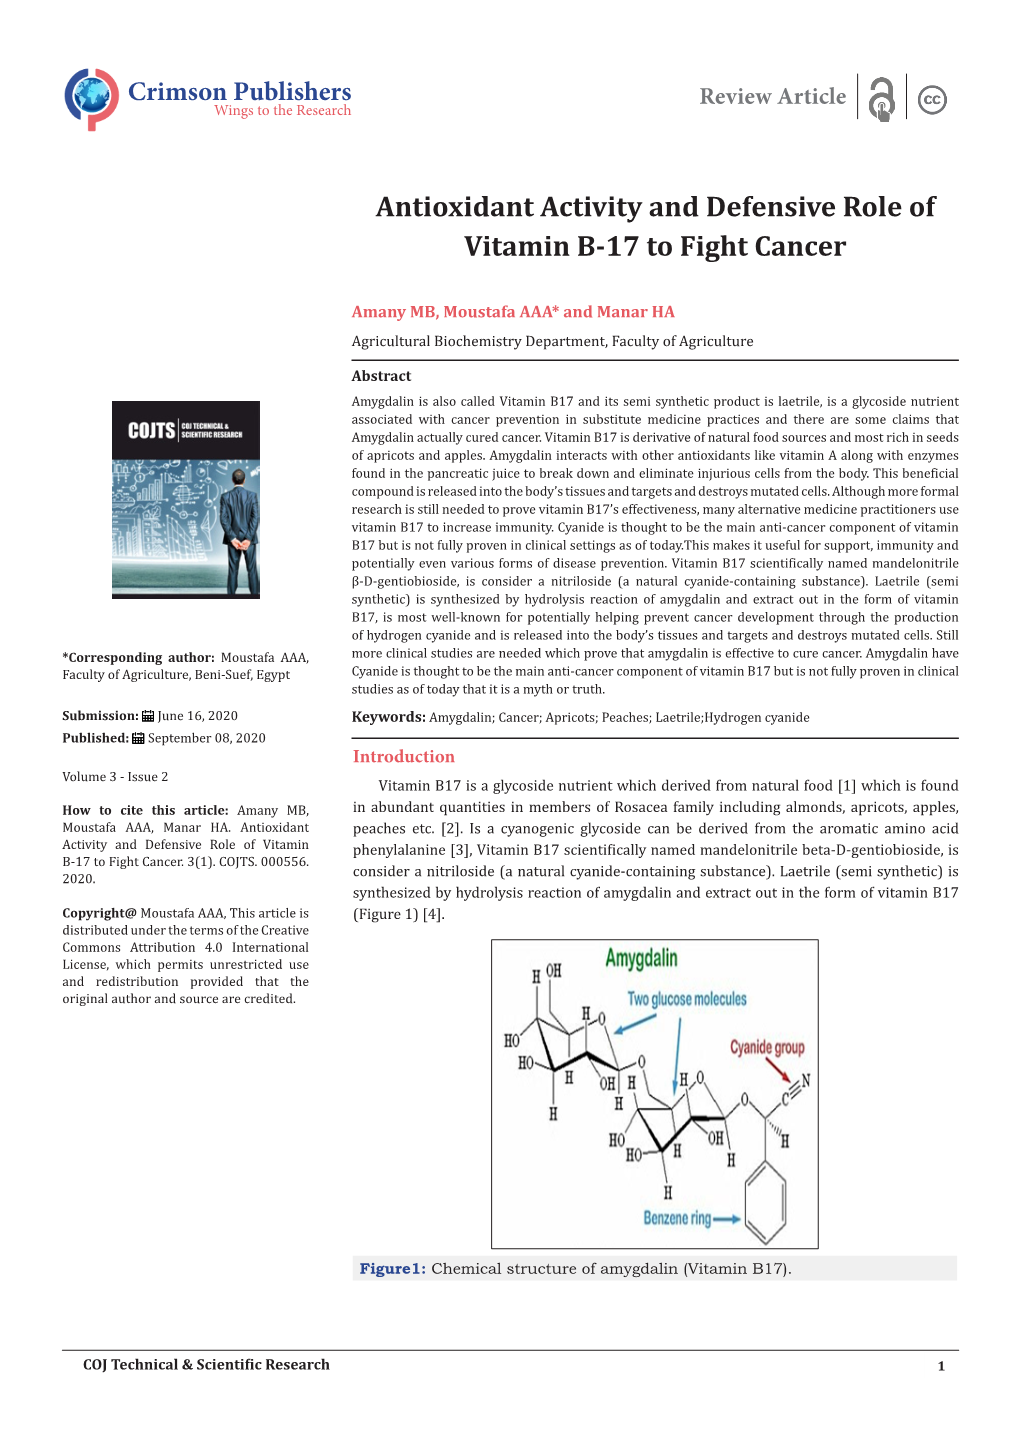 Antioxidant Activity and Defensive Role of Vitamin B-17 to Fight Cancer